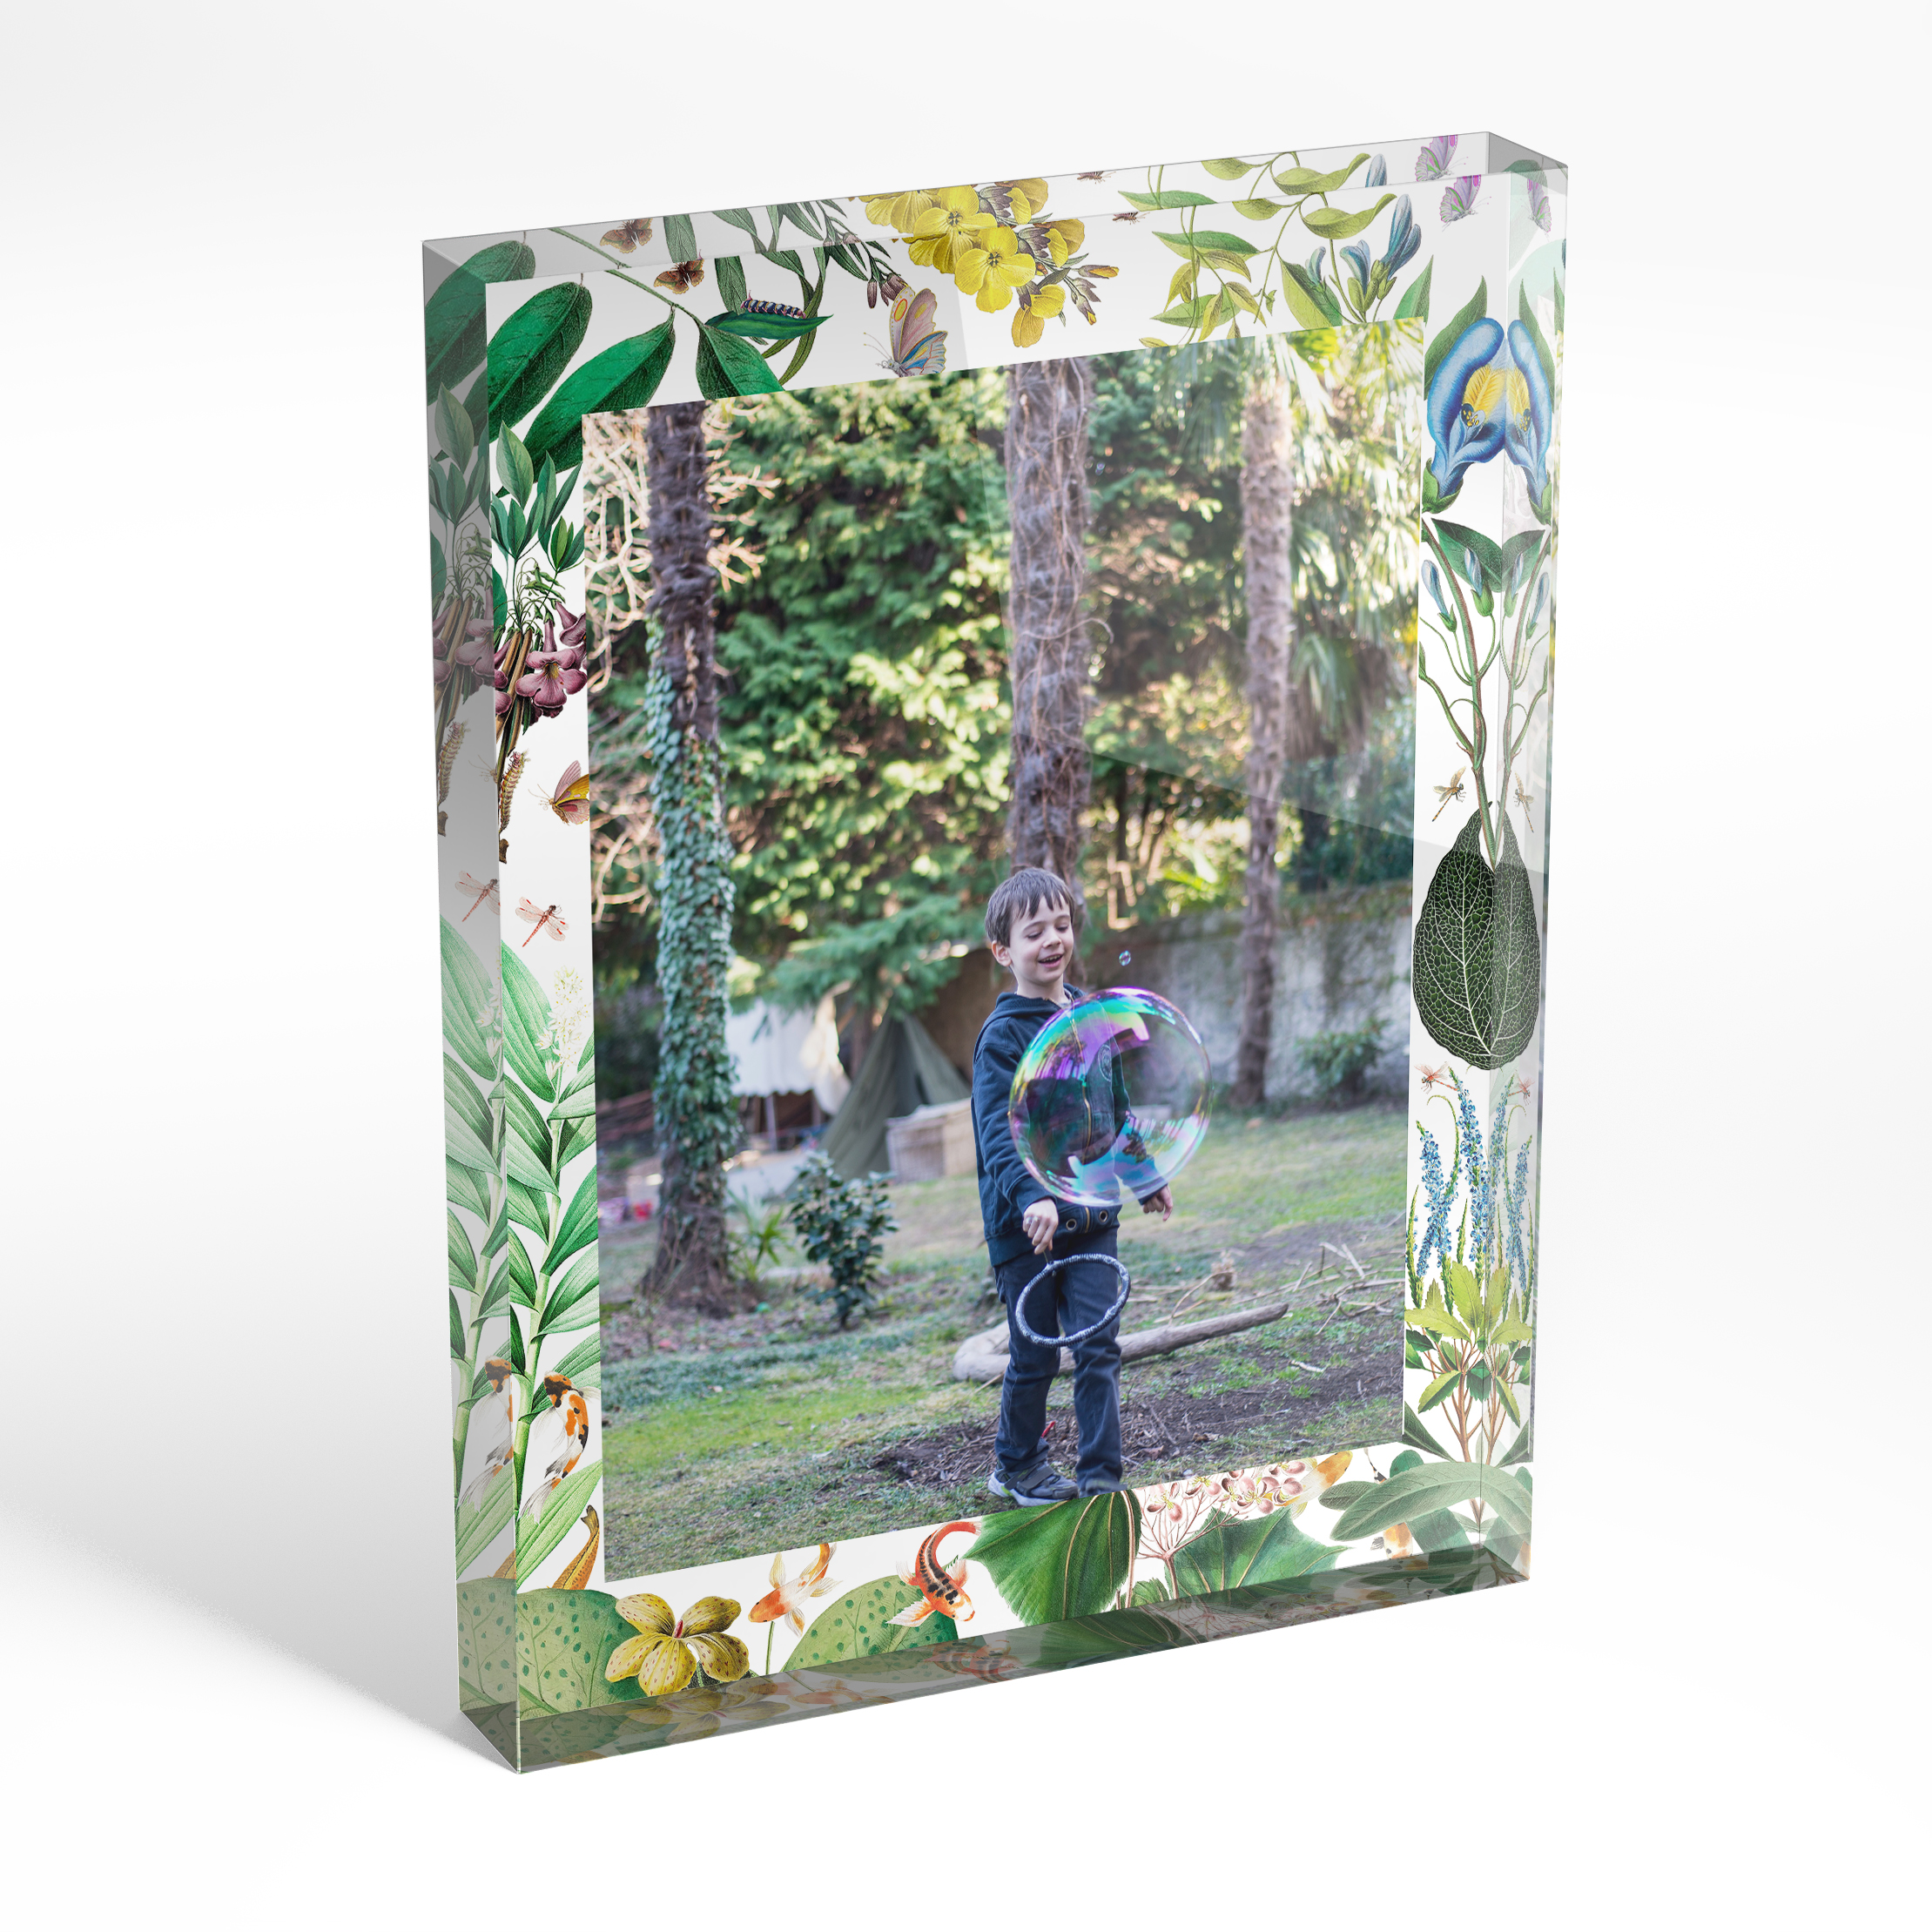 An angled side view of a portrait layout Acrylic Glass Photo Block with space for 1 photo. Thiis design is named "Fishpond Photo". 